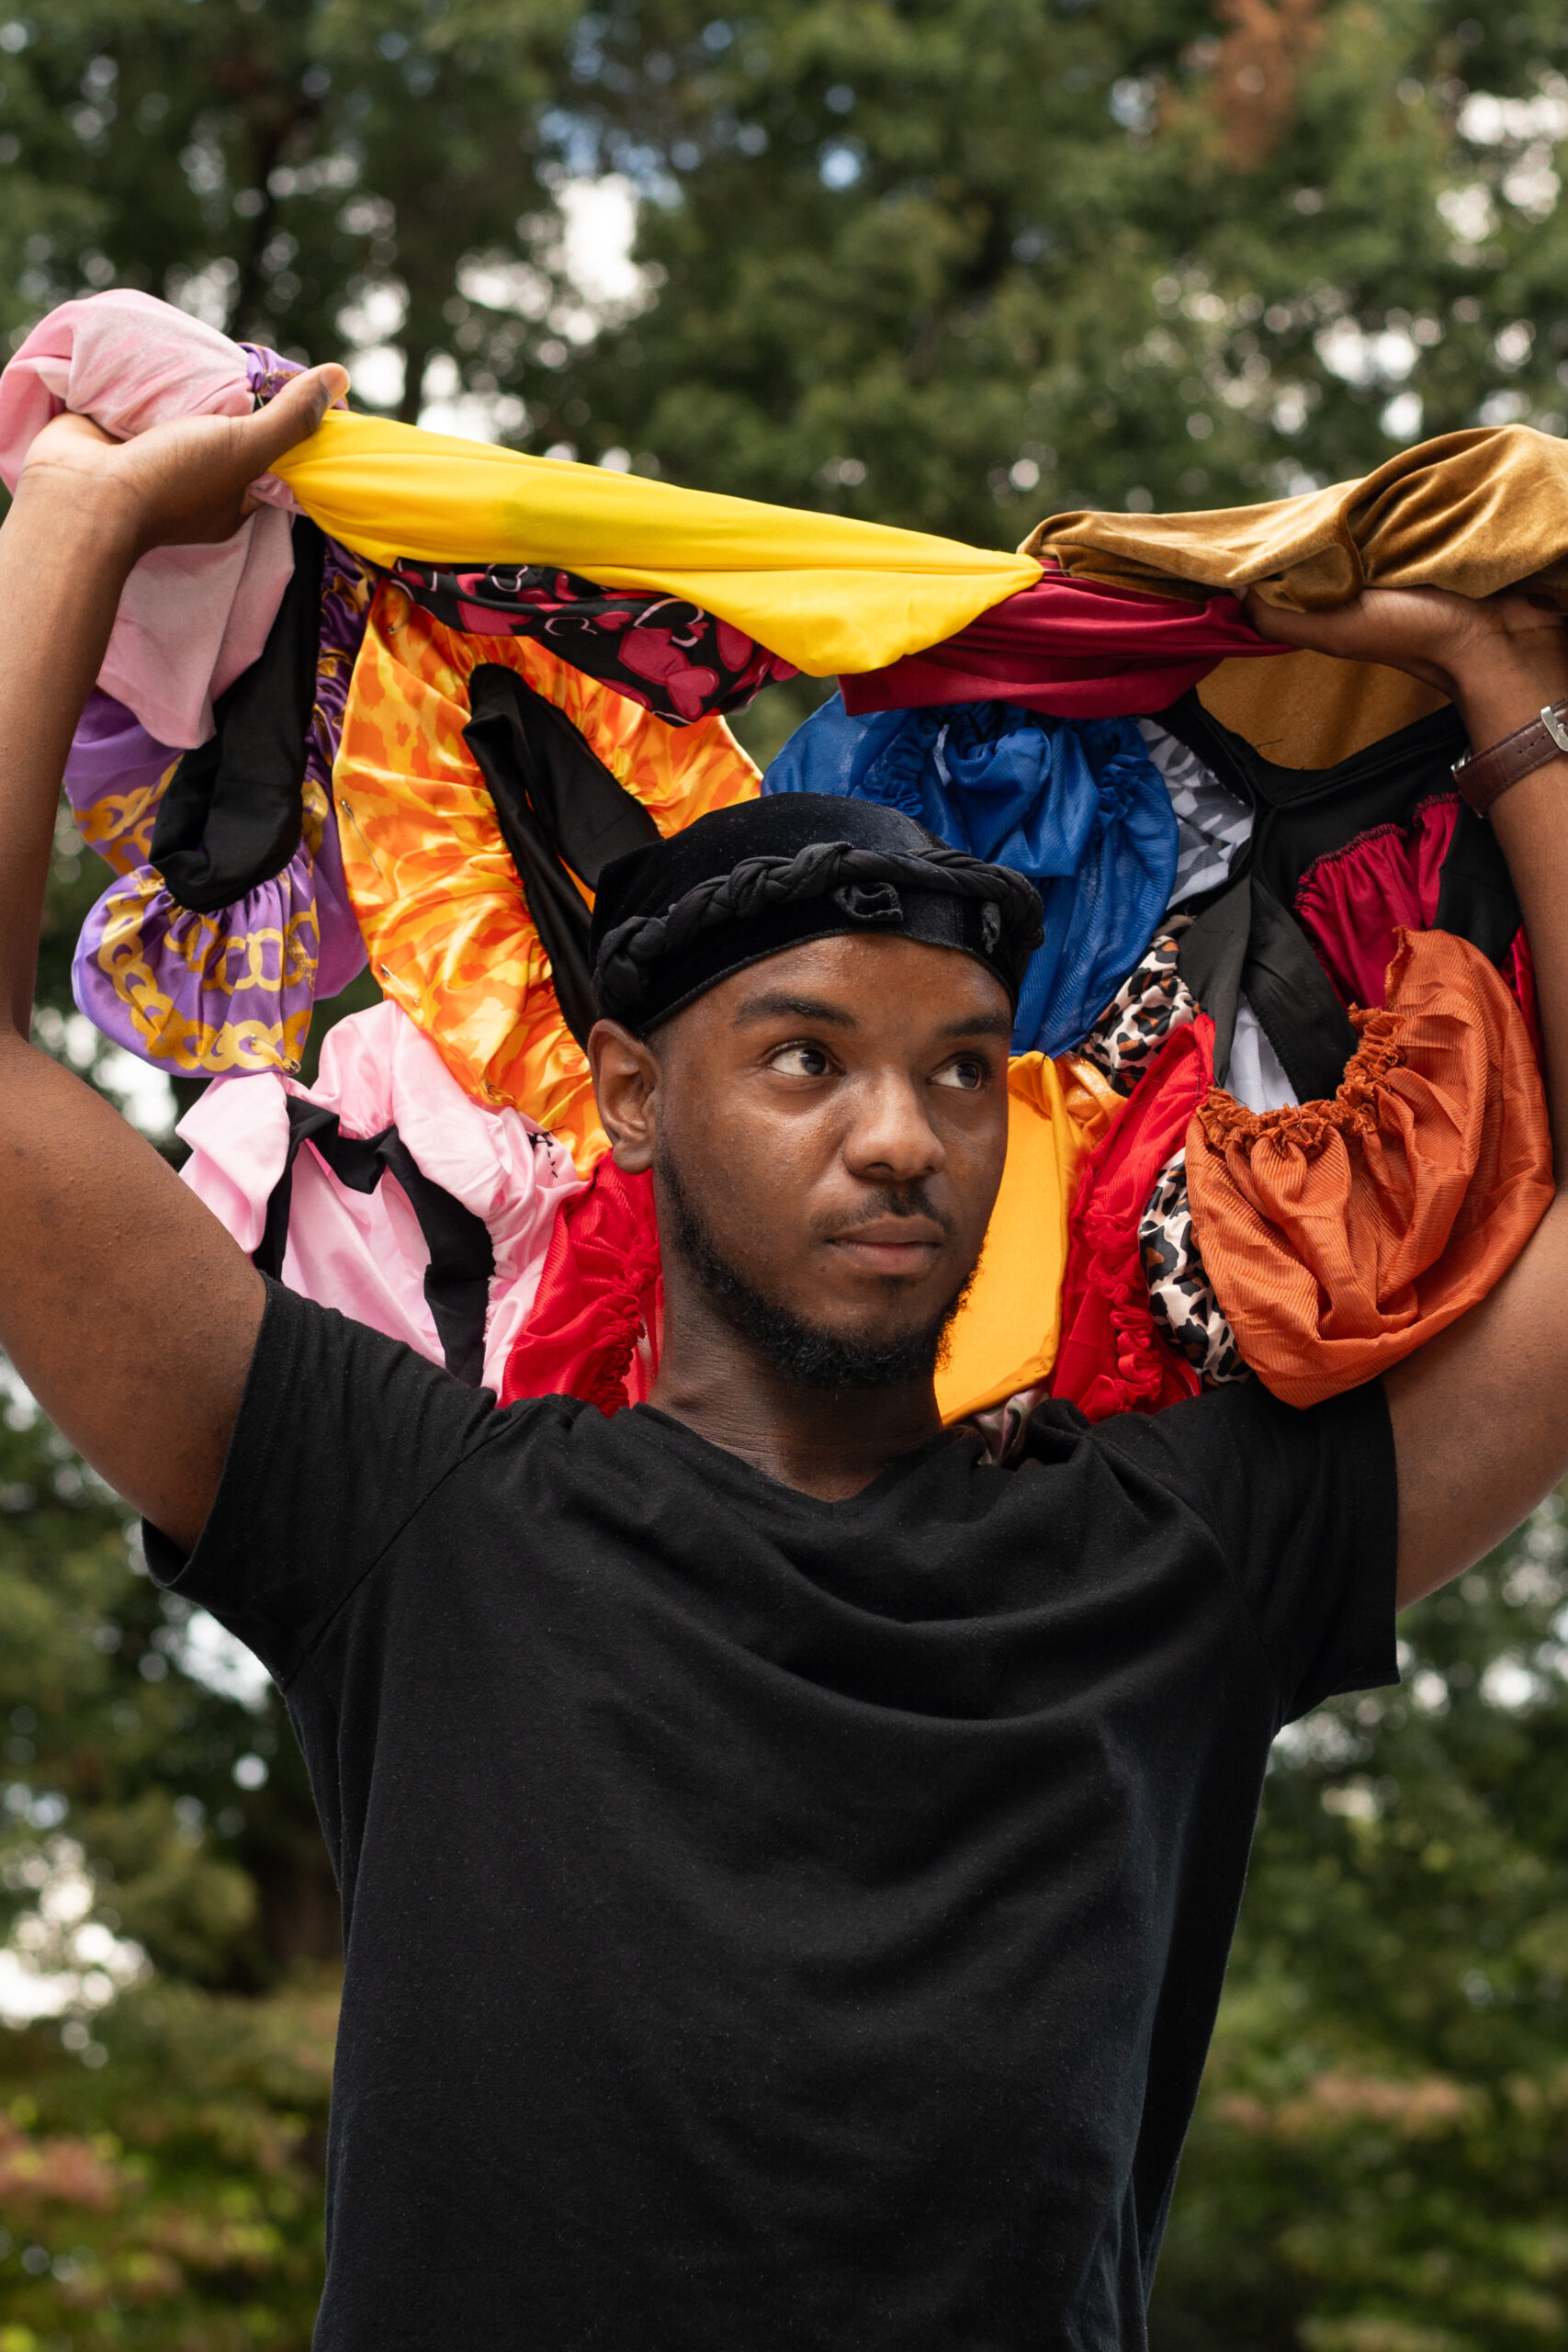 An outdoor portrait of a Black man, looking slightly to the right of the photographer. He is holding up his ornate head covering, made from several silky or satiny fabrics of different colors bright colors.